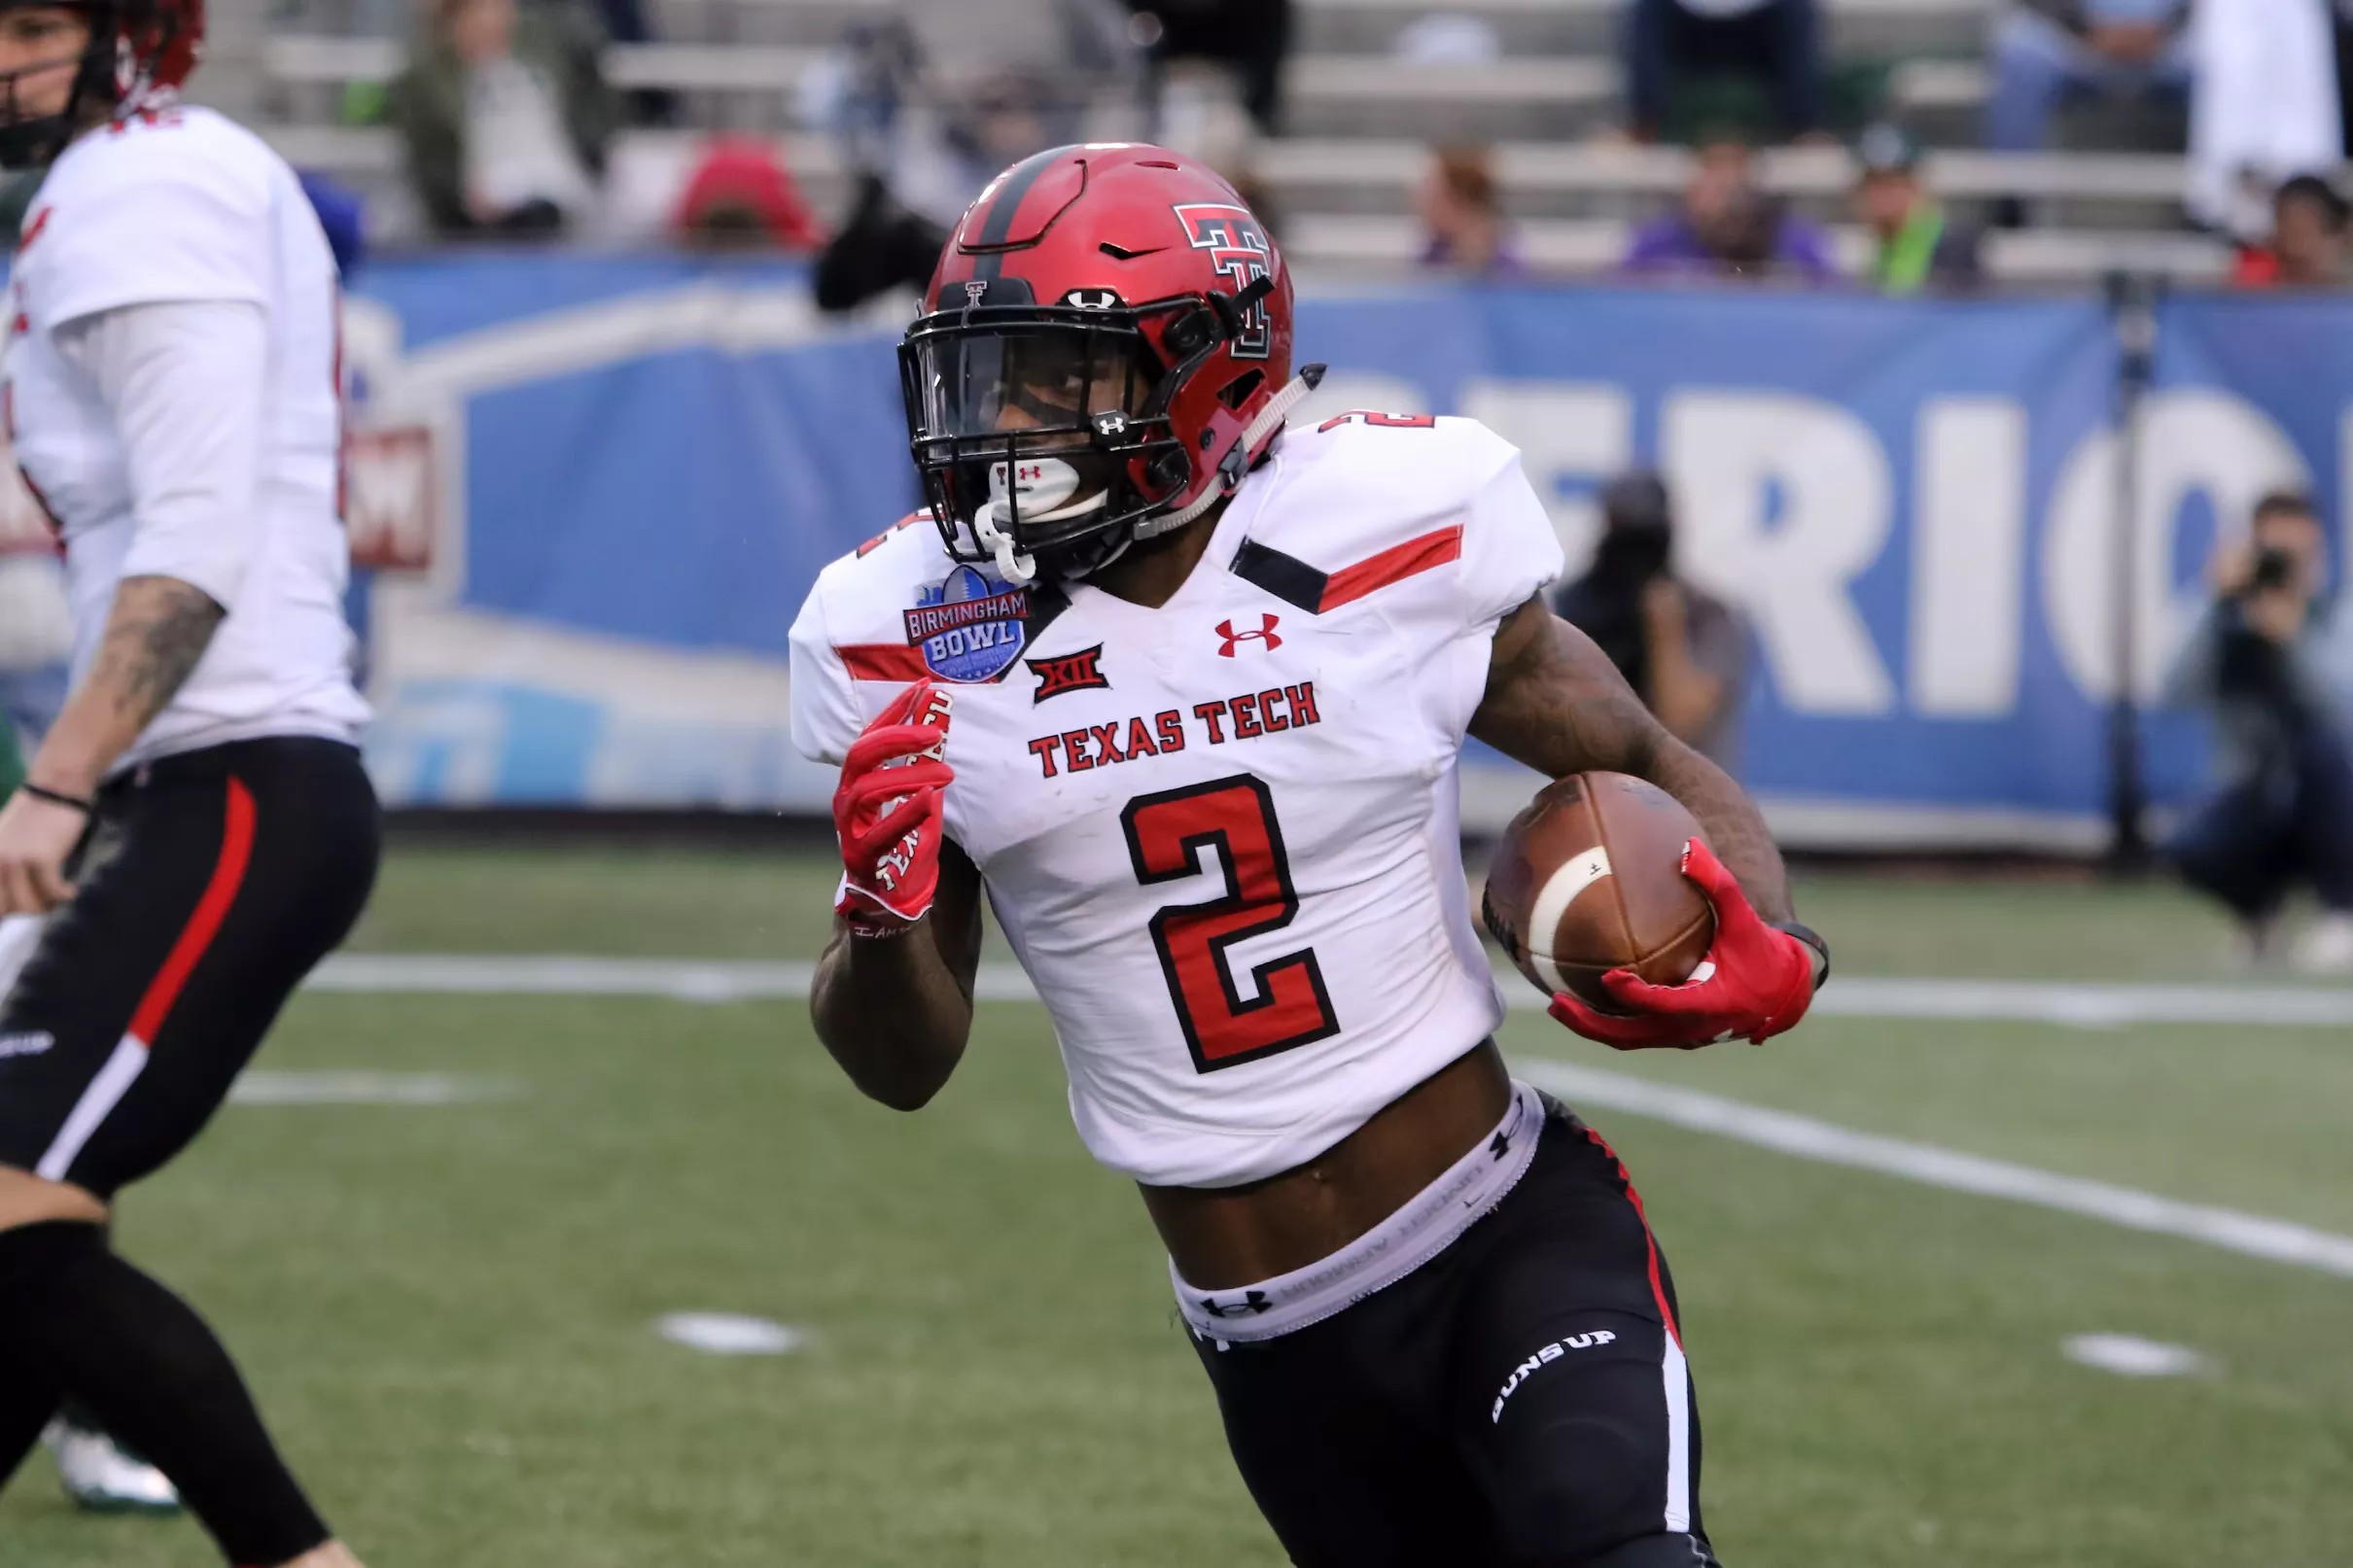 Top 5 wide receiver prospects before the NFL Combine